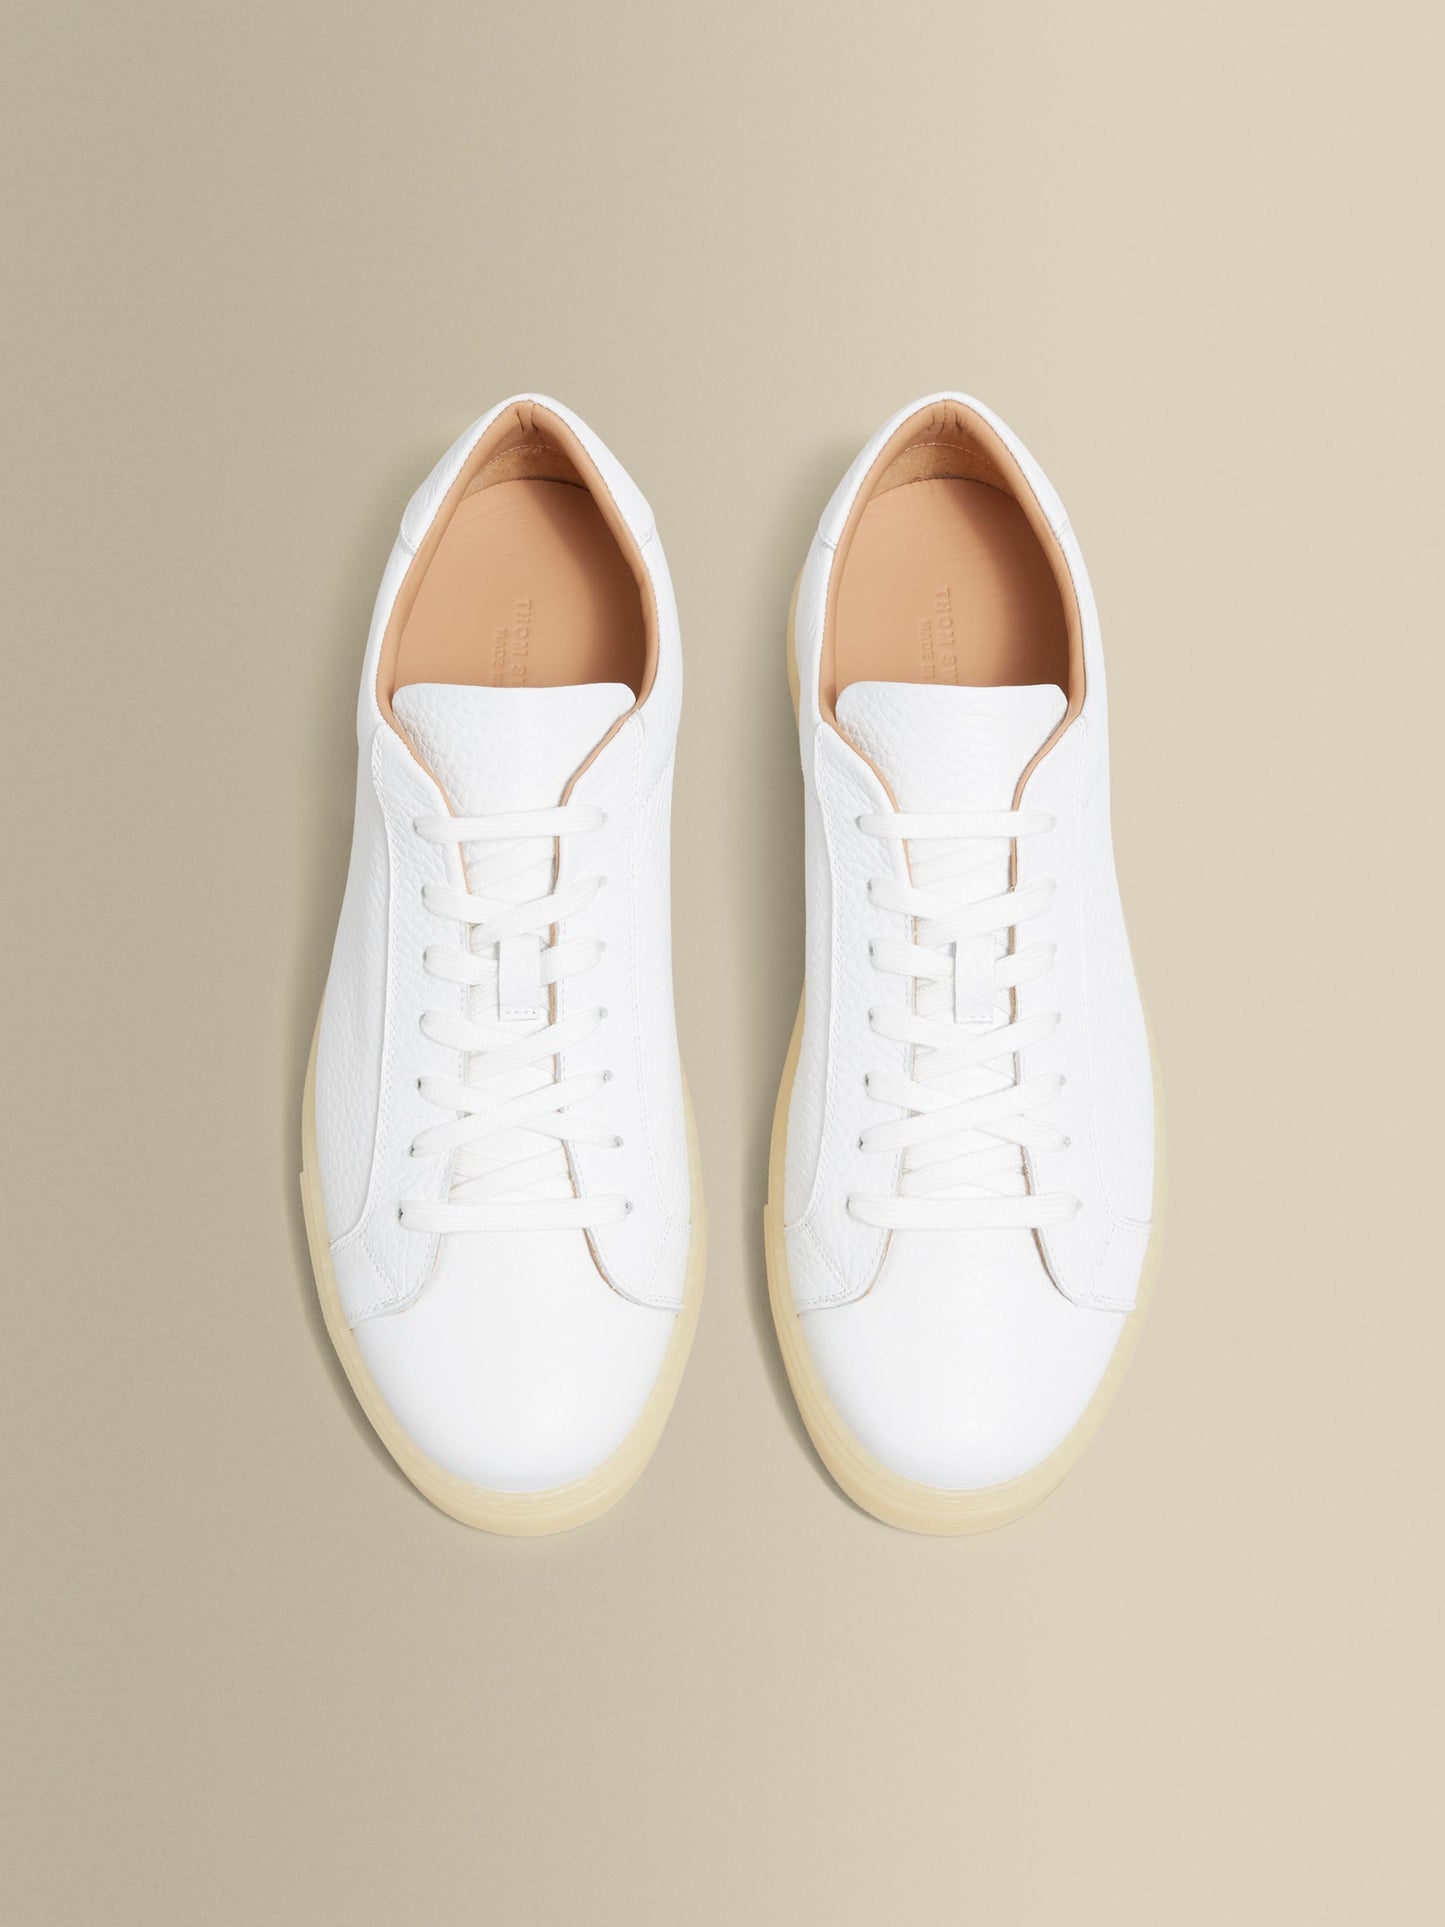 Leather Sneakers With Gum Sole Overhead Product Image